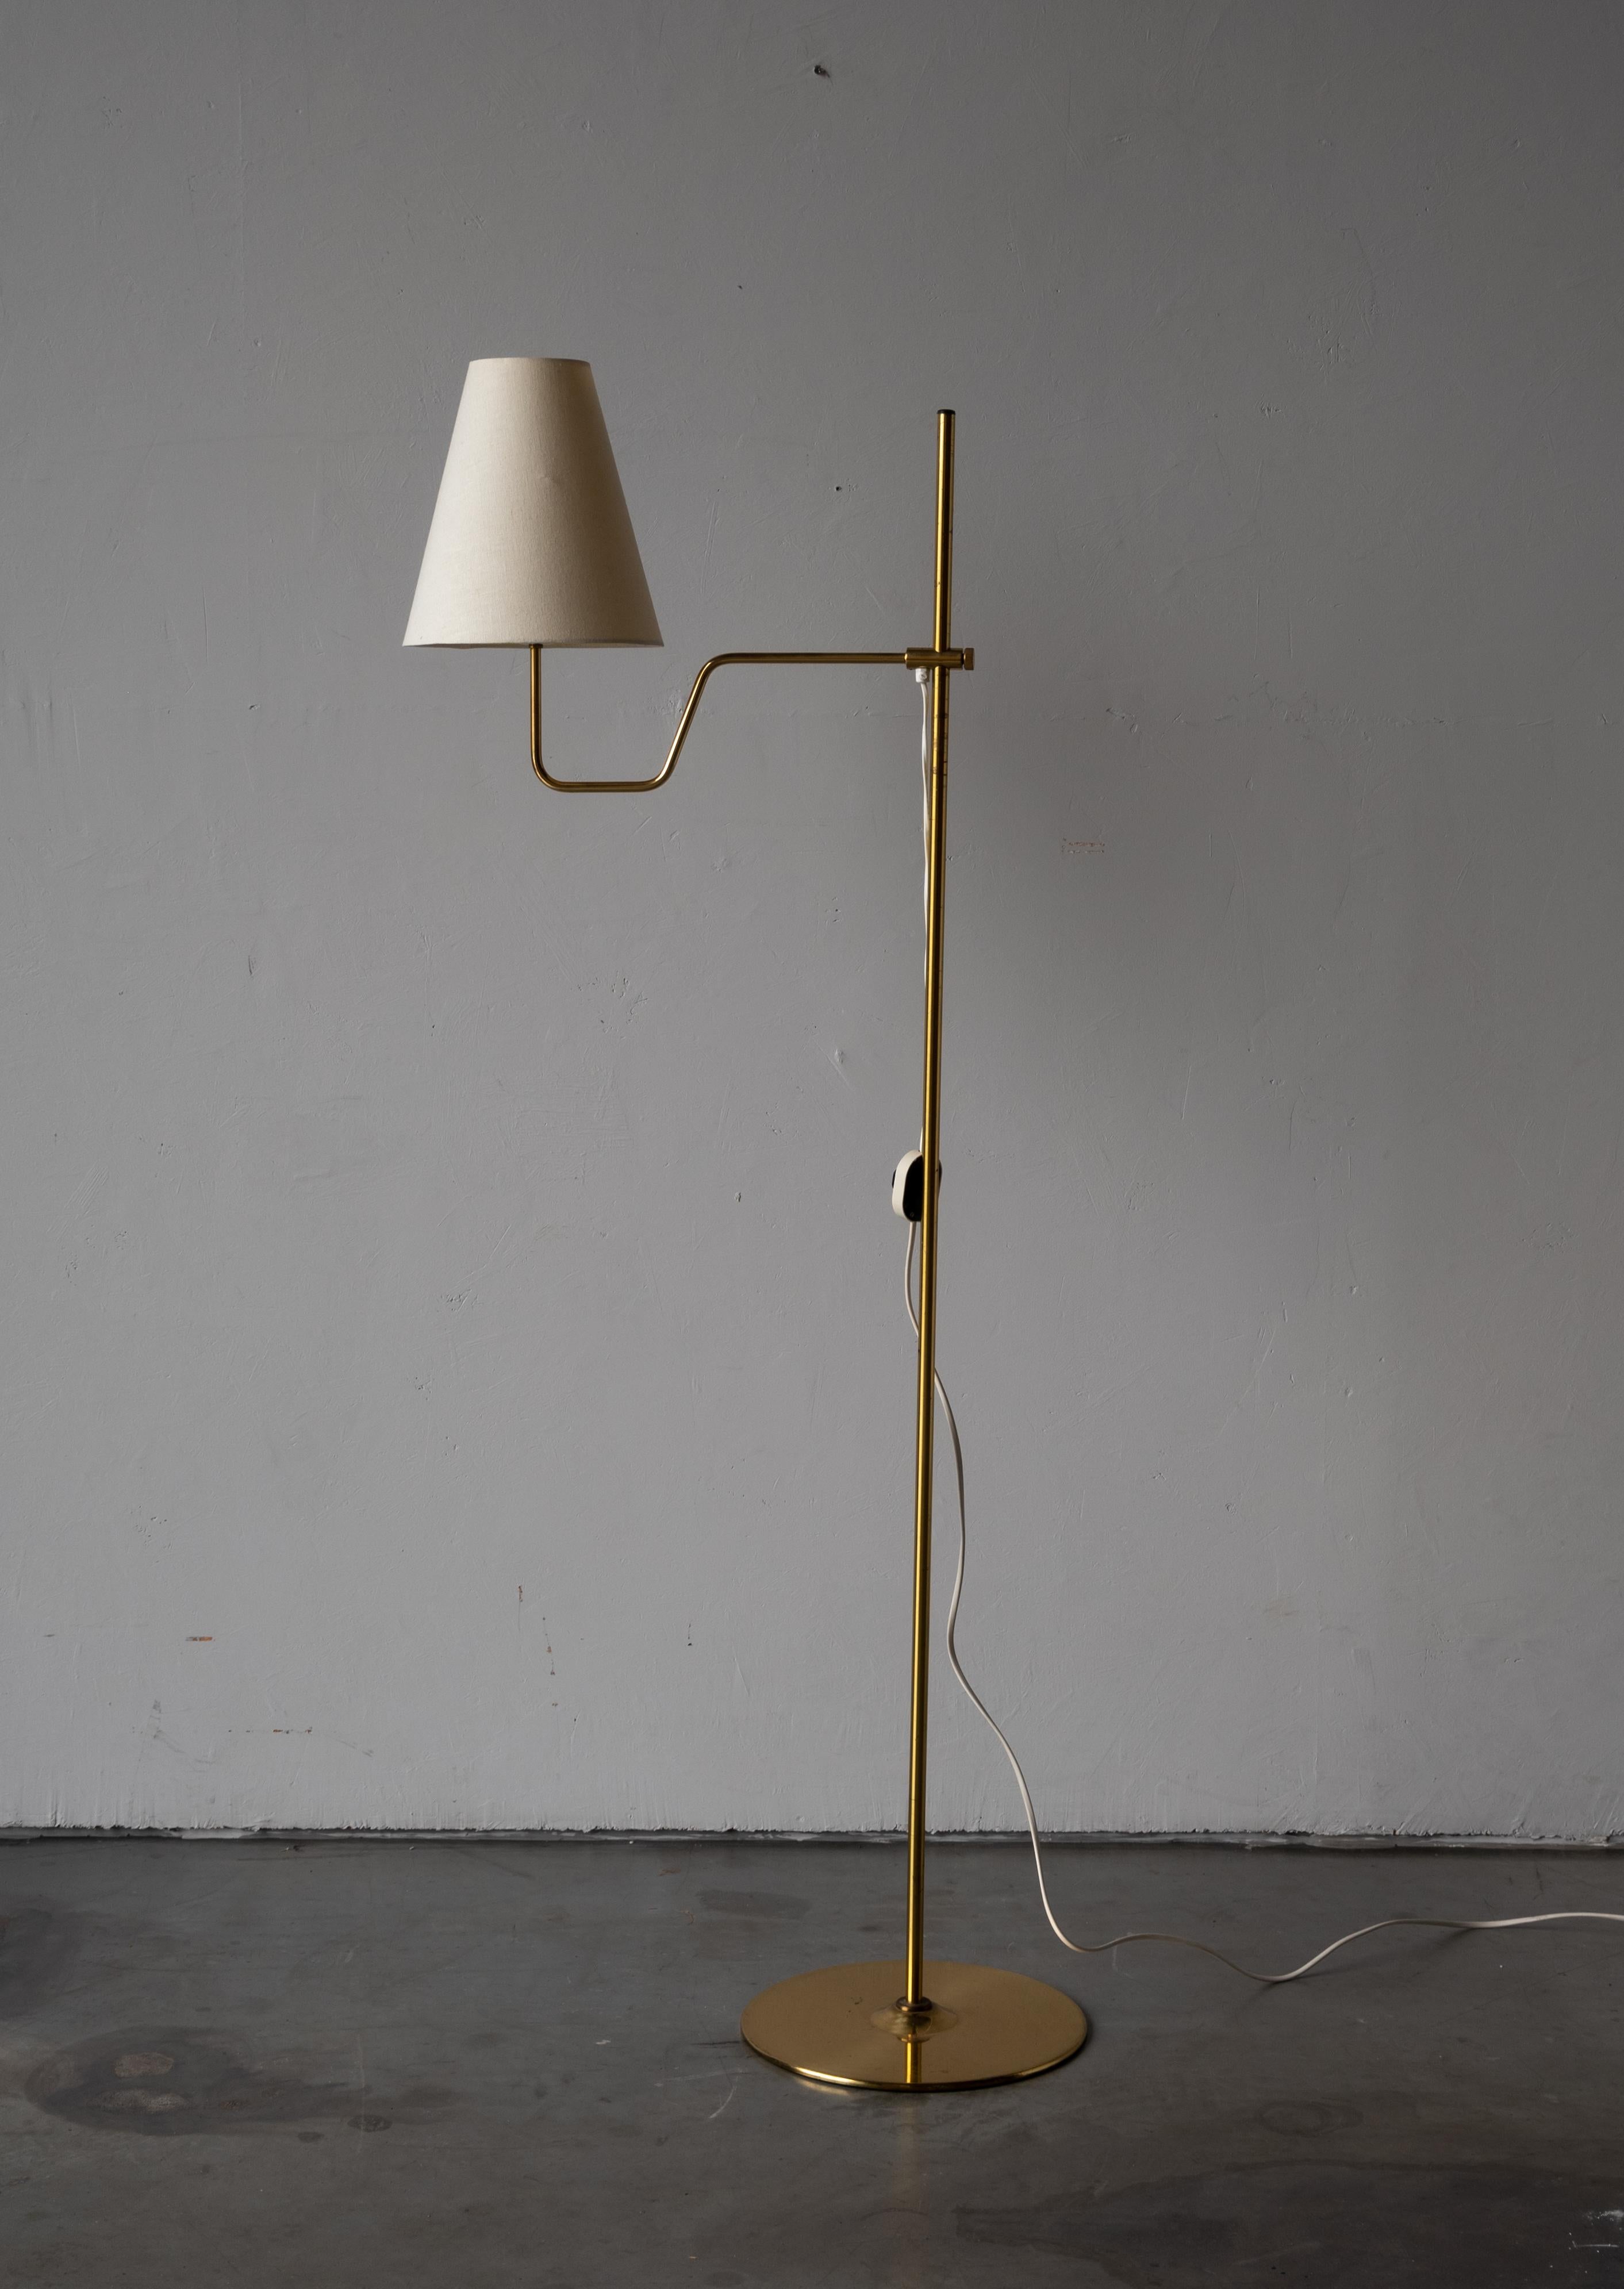 A floor lamp, designed by Hans-Agne Jakobsson for his own firm in Markaryd, Sweden. c. 1970s. Labeled.

Other designers of the period include Paavo Tynell, Alvar Aalto, Hans Bergström, Angelo Lelii, and Max Ingrand.